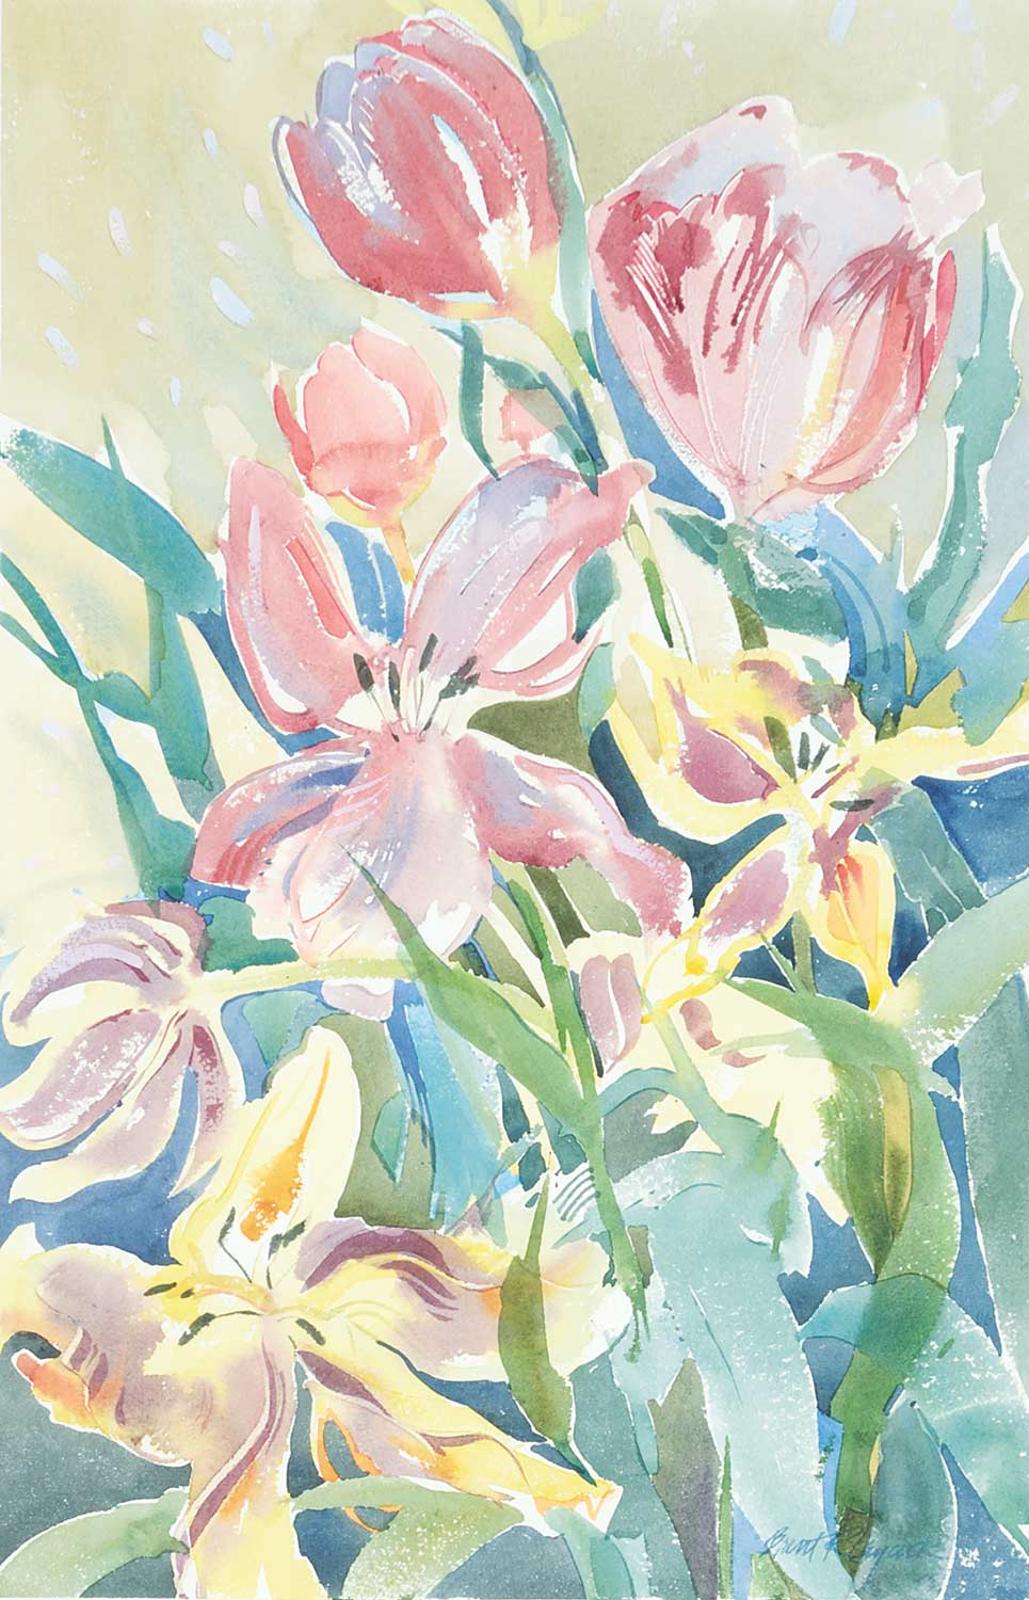 Brent R. Laycock (1947) - Untitled - Spring Flowers